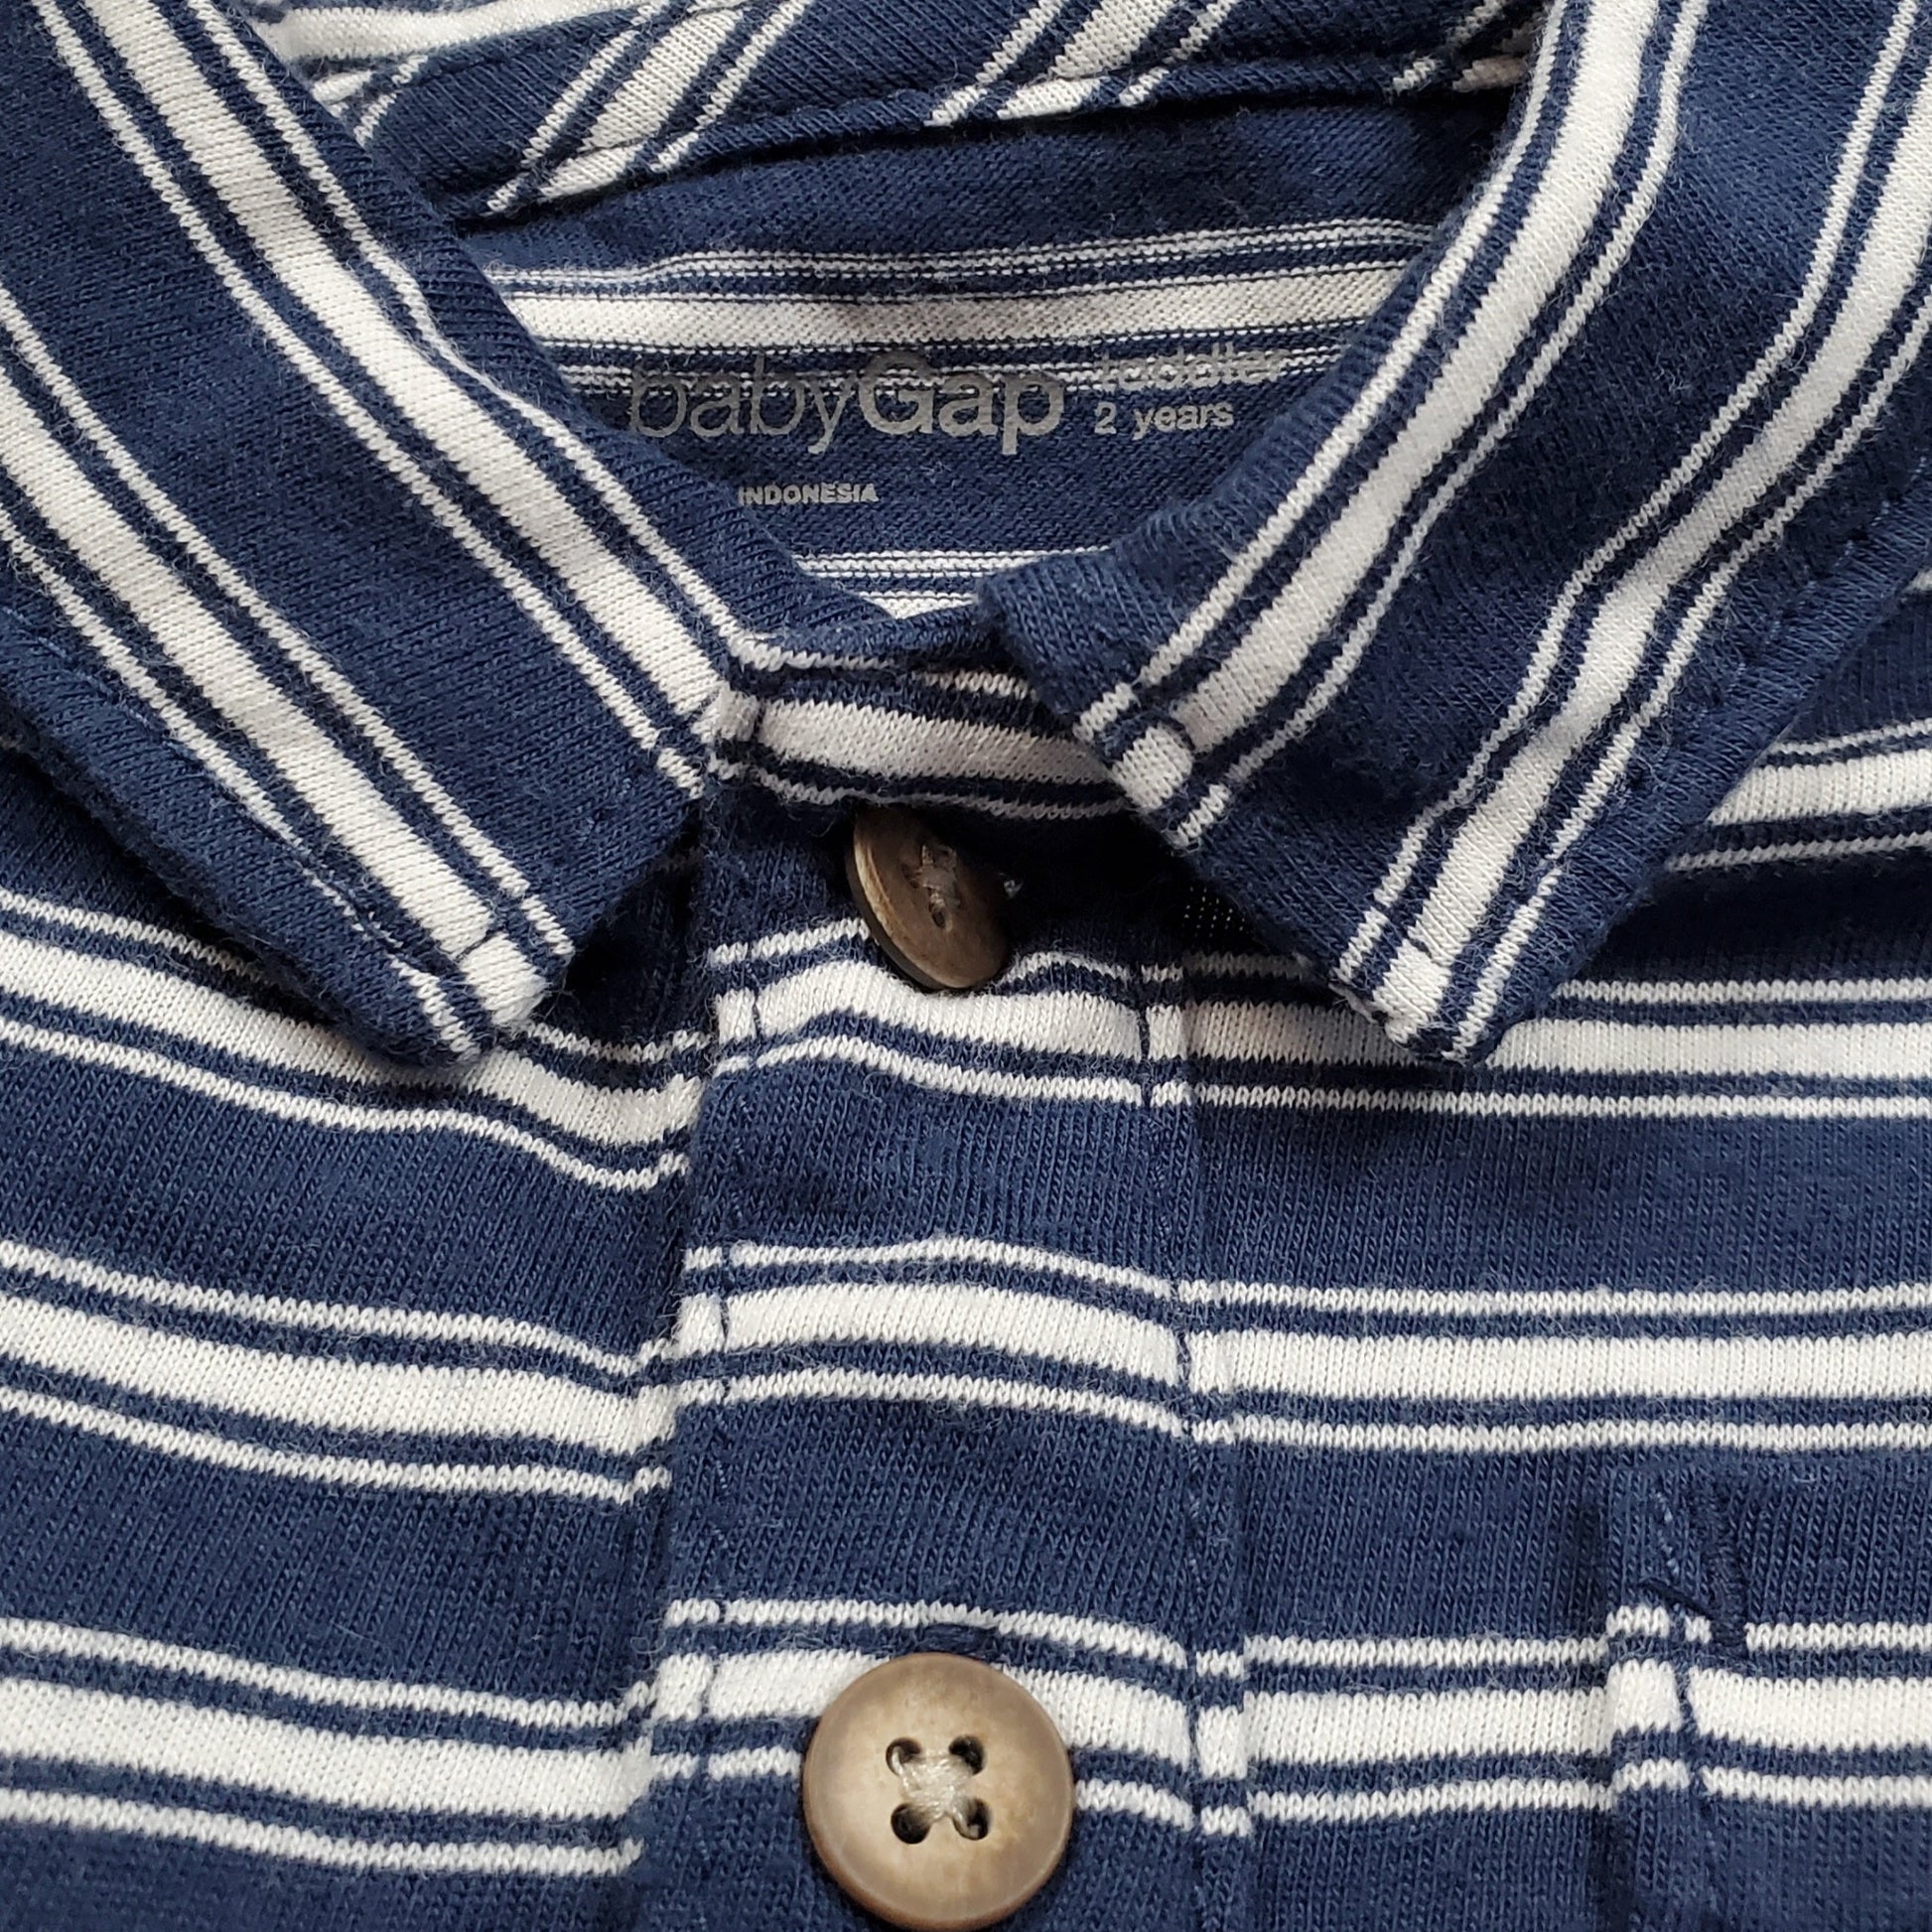 Baby Gap Boys Navy Blue Striped Polo Shirt 2T Used, close-up